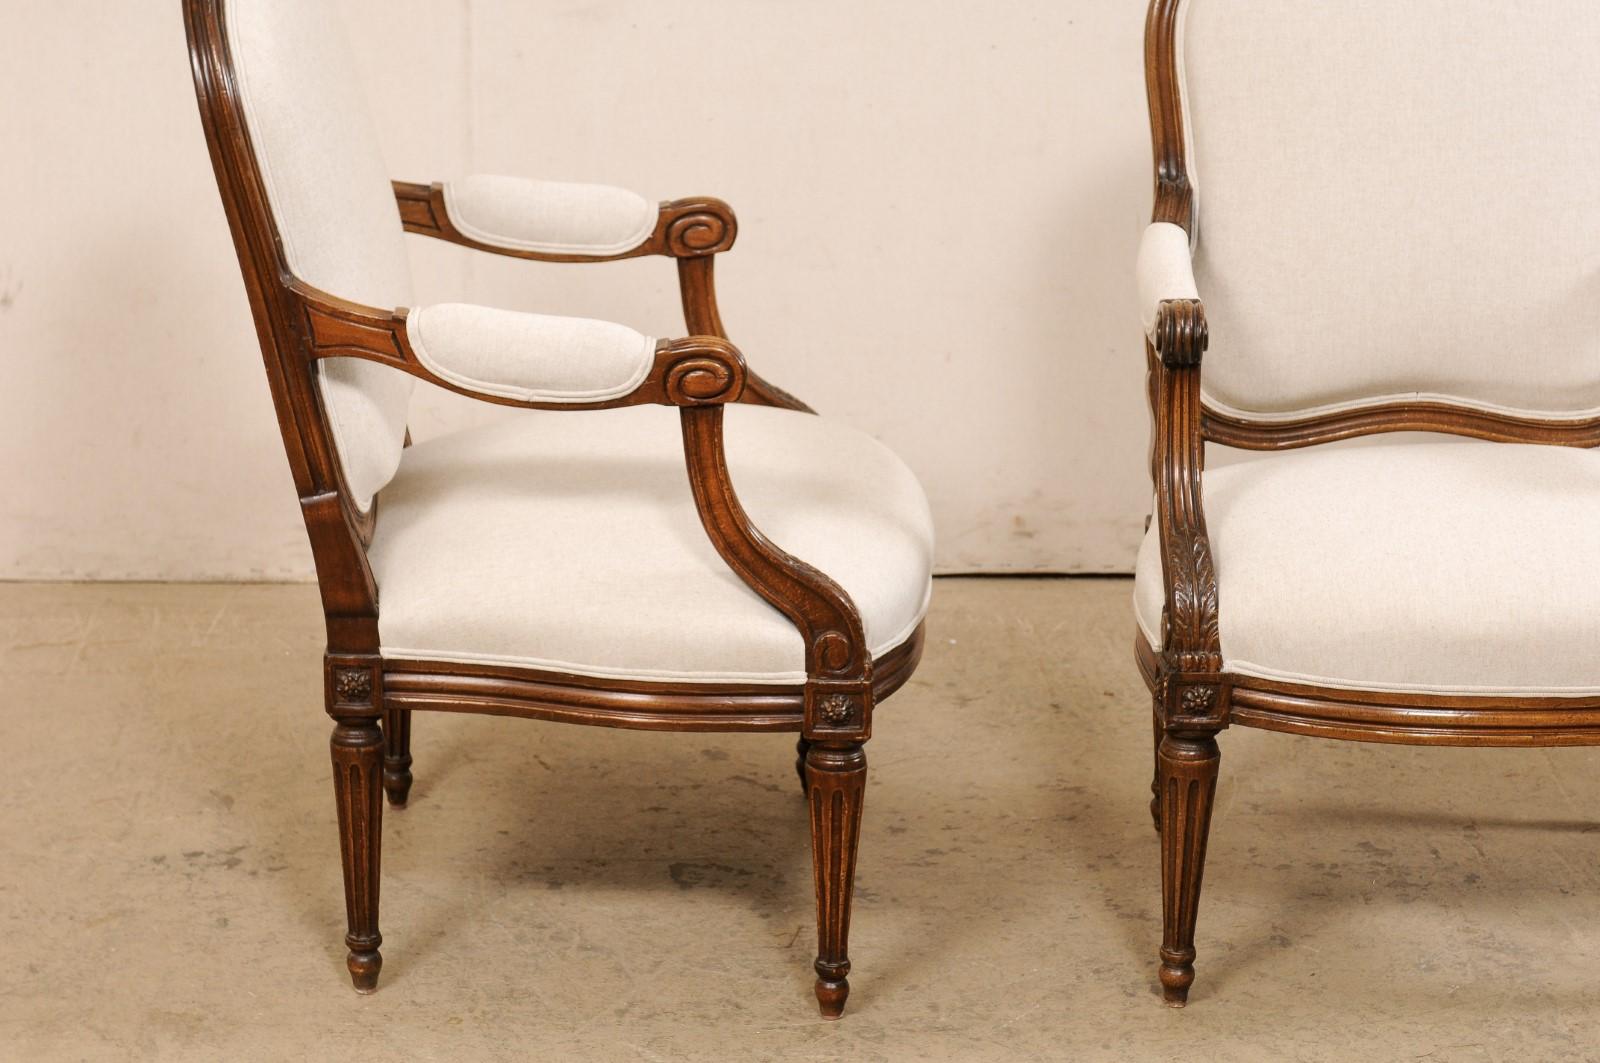 19th Century 19th C. French Pair Carved-Wood Fauteuil Armchairs, Newly Upholstered in Linen For Sale